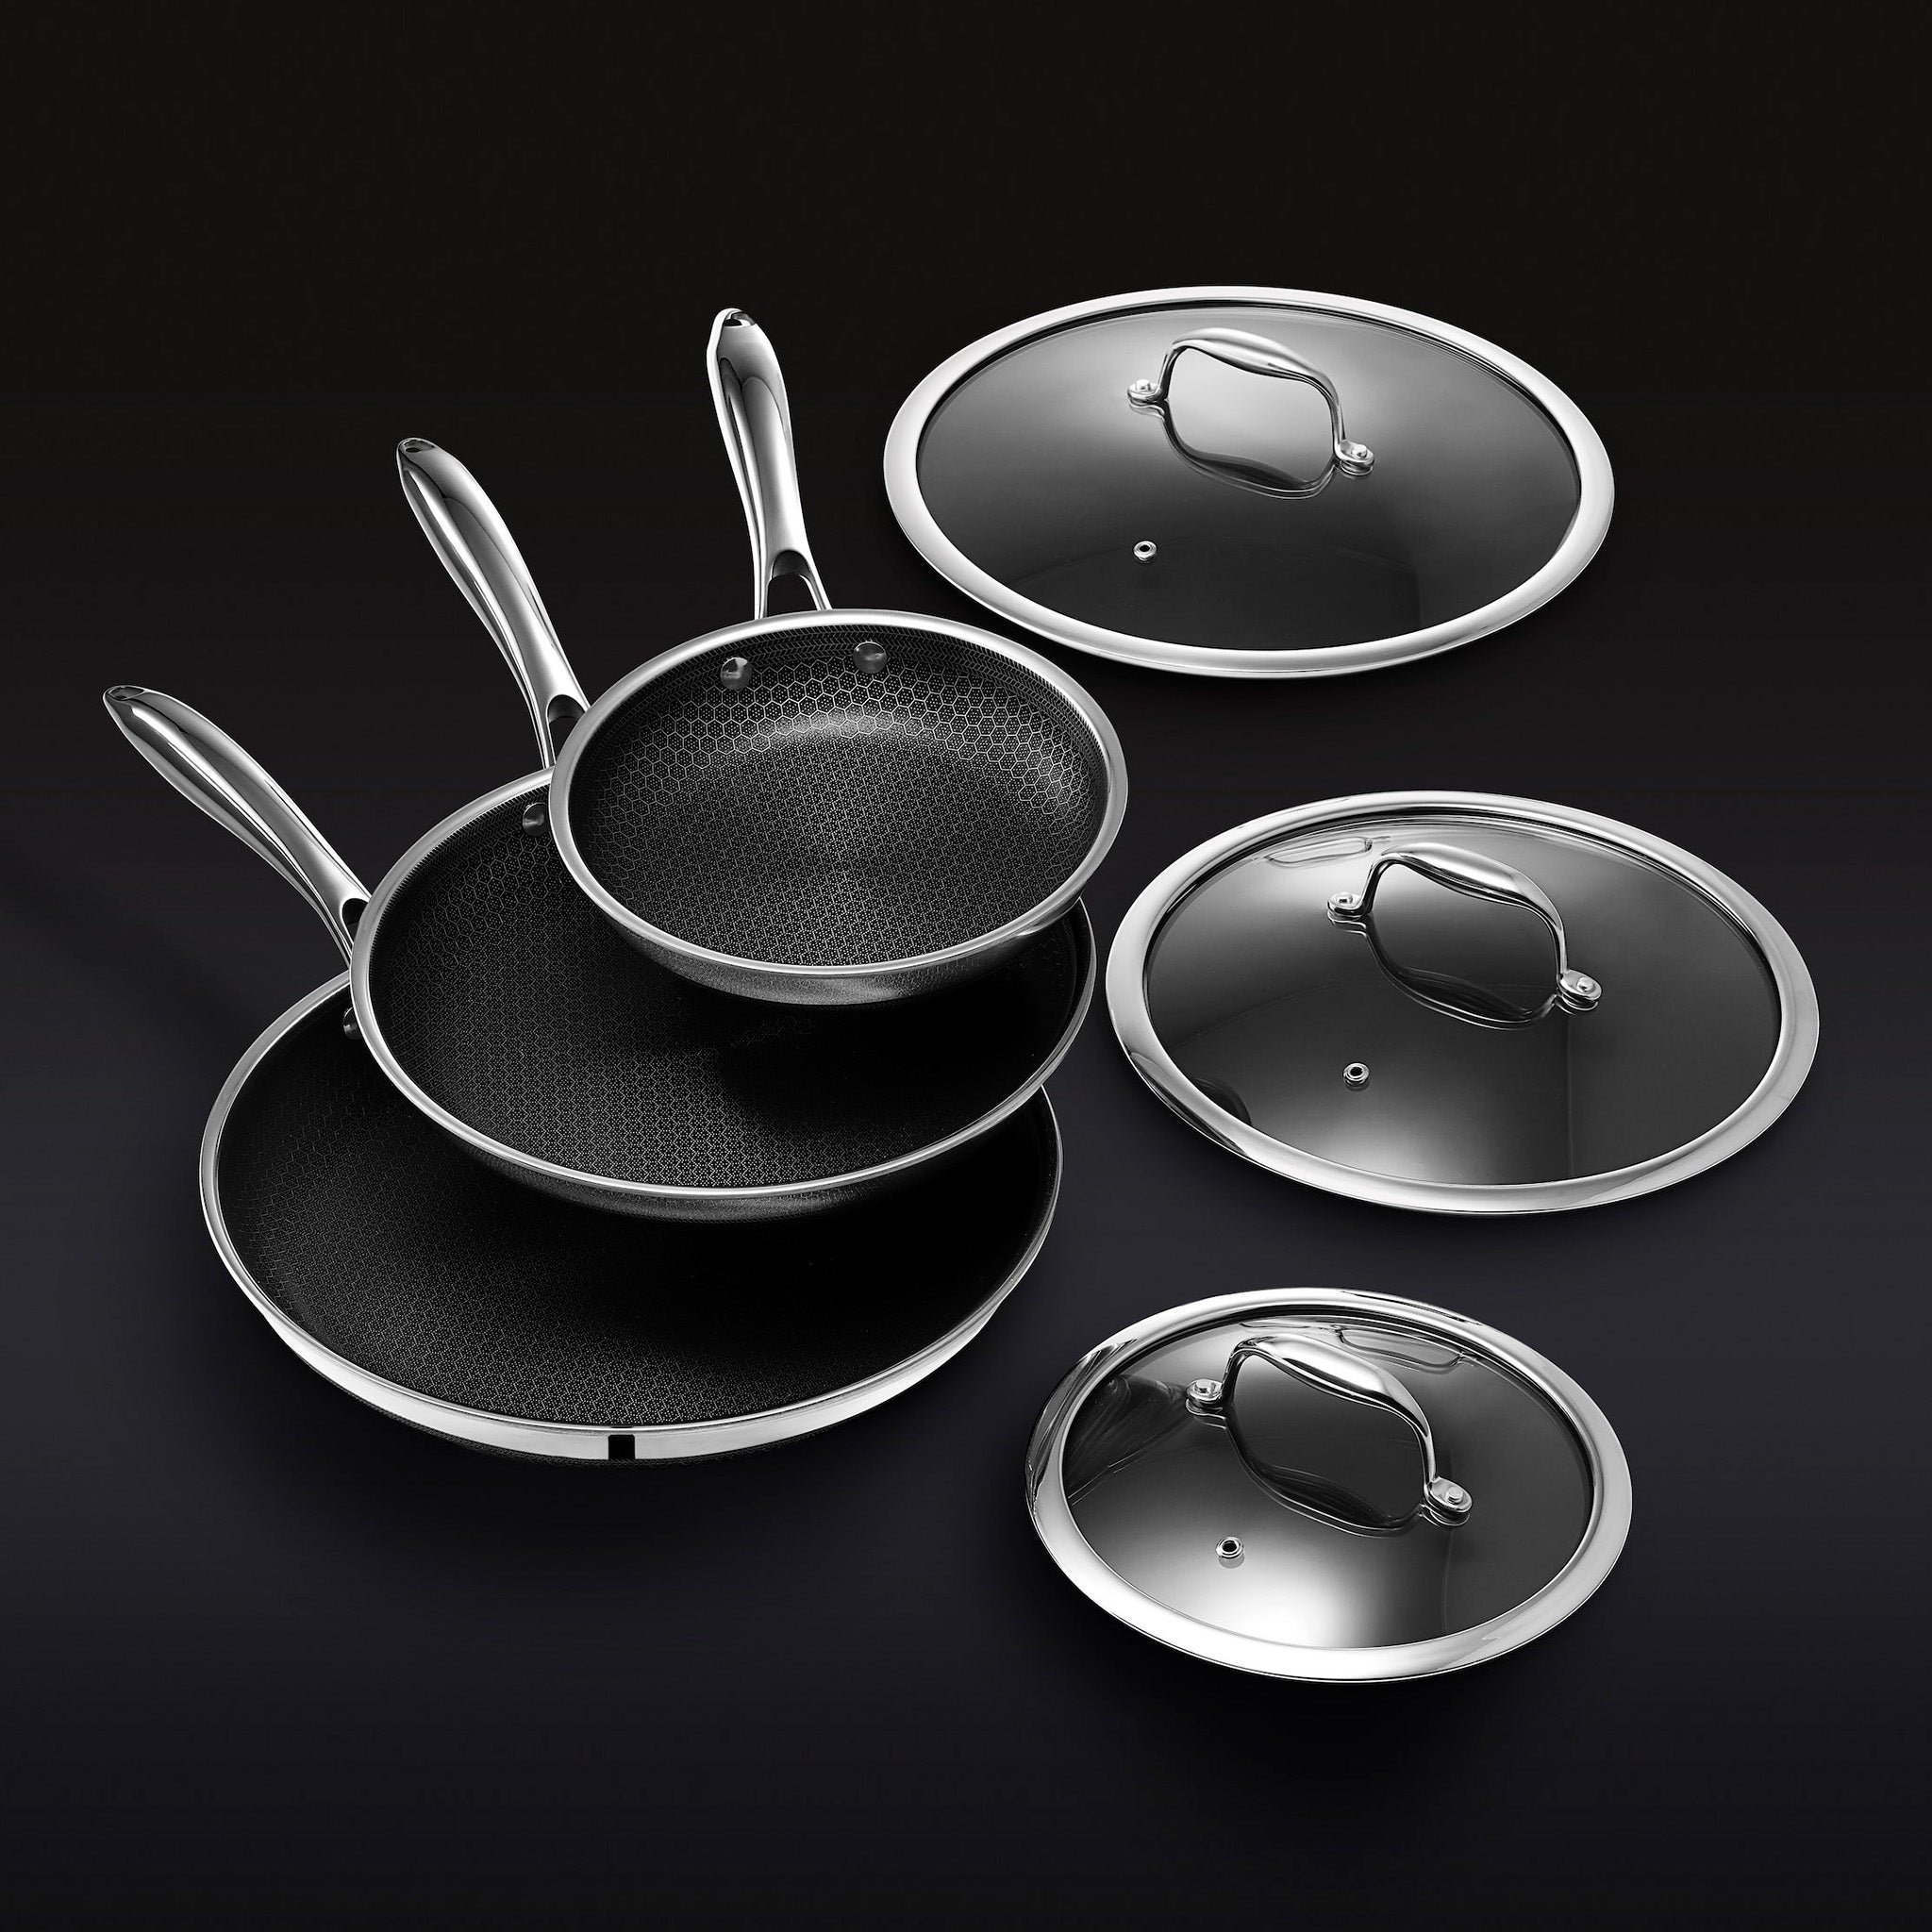 Stacked nonstick frying pans with three matching glass lids against a black background.